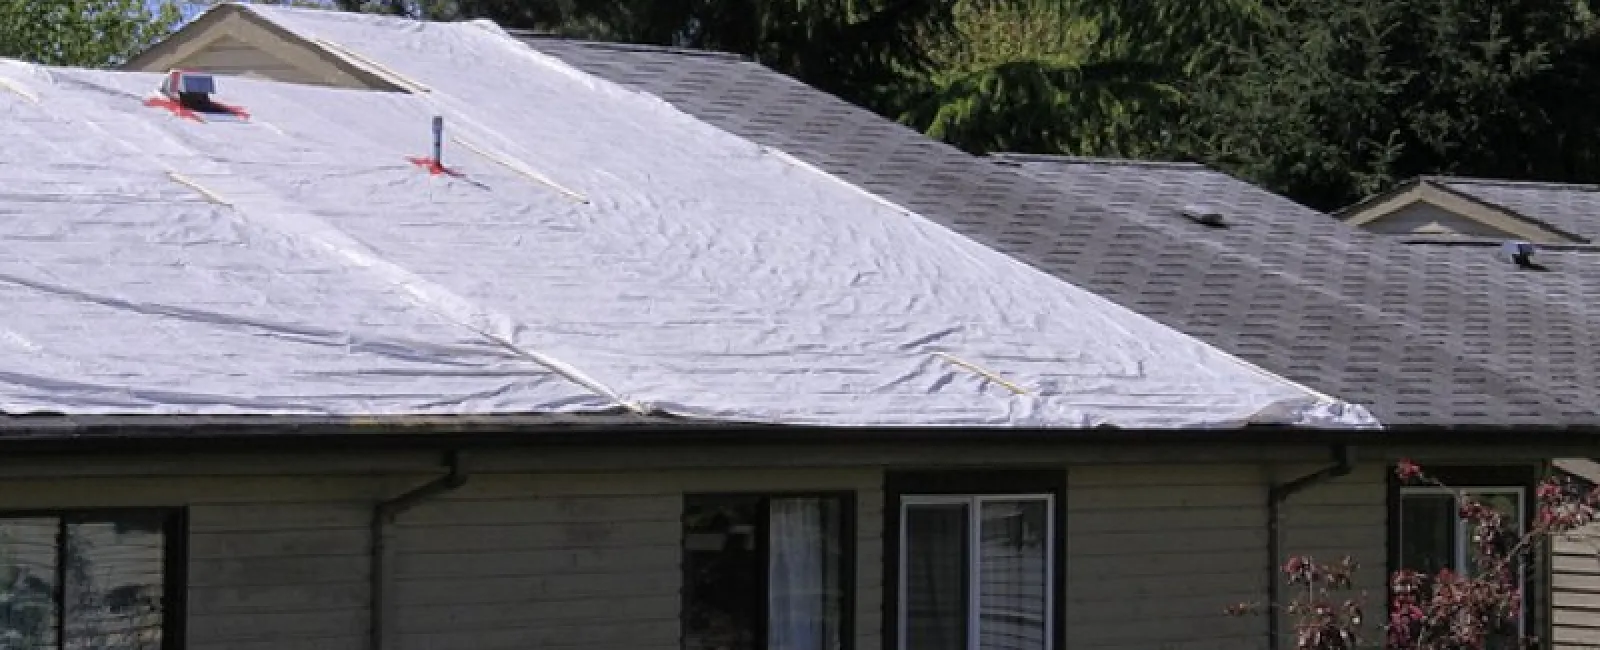 Roof Leaks: How Exposed Is Your Home?